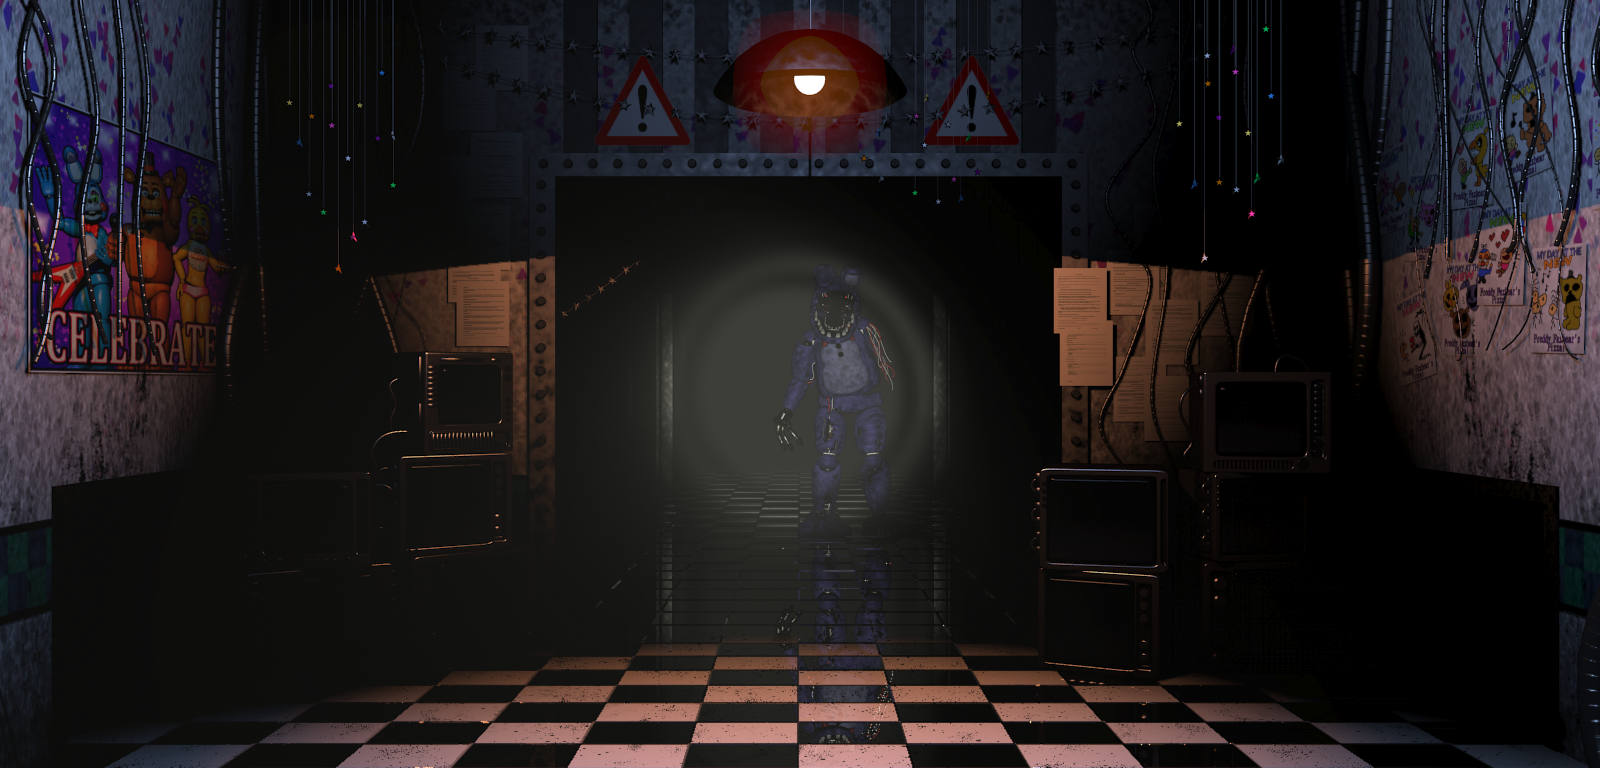 According to the FNAF 2 mini game map, toy Freddy could have